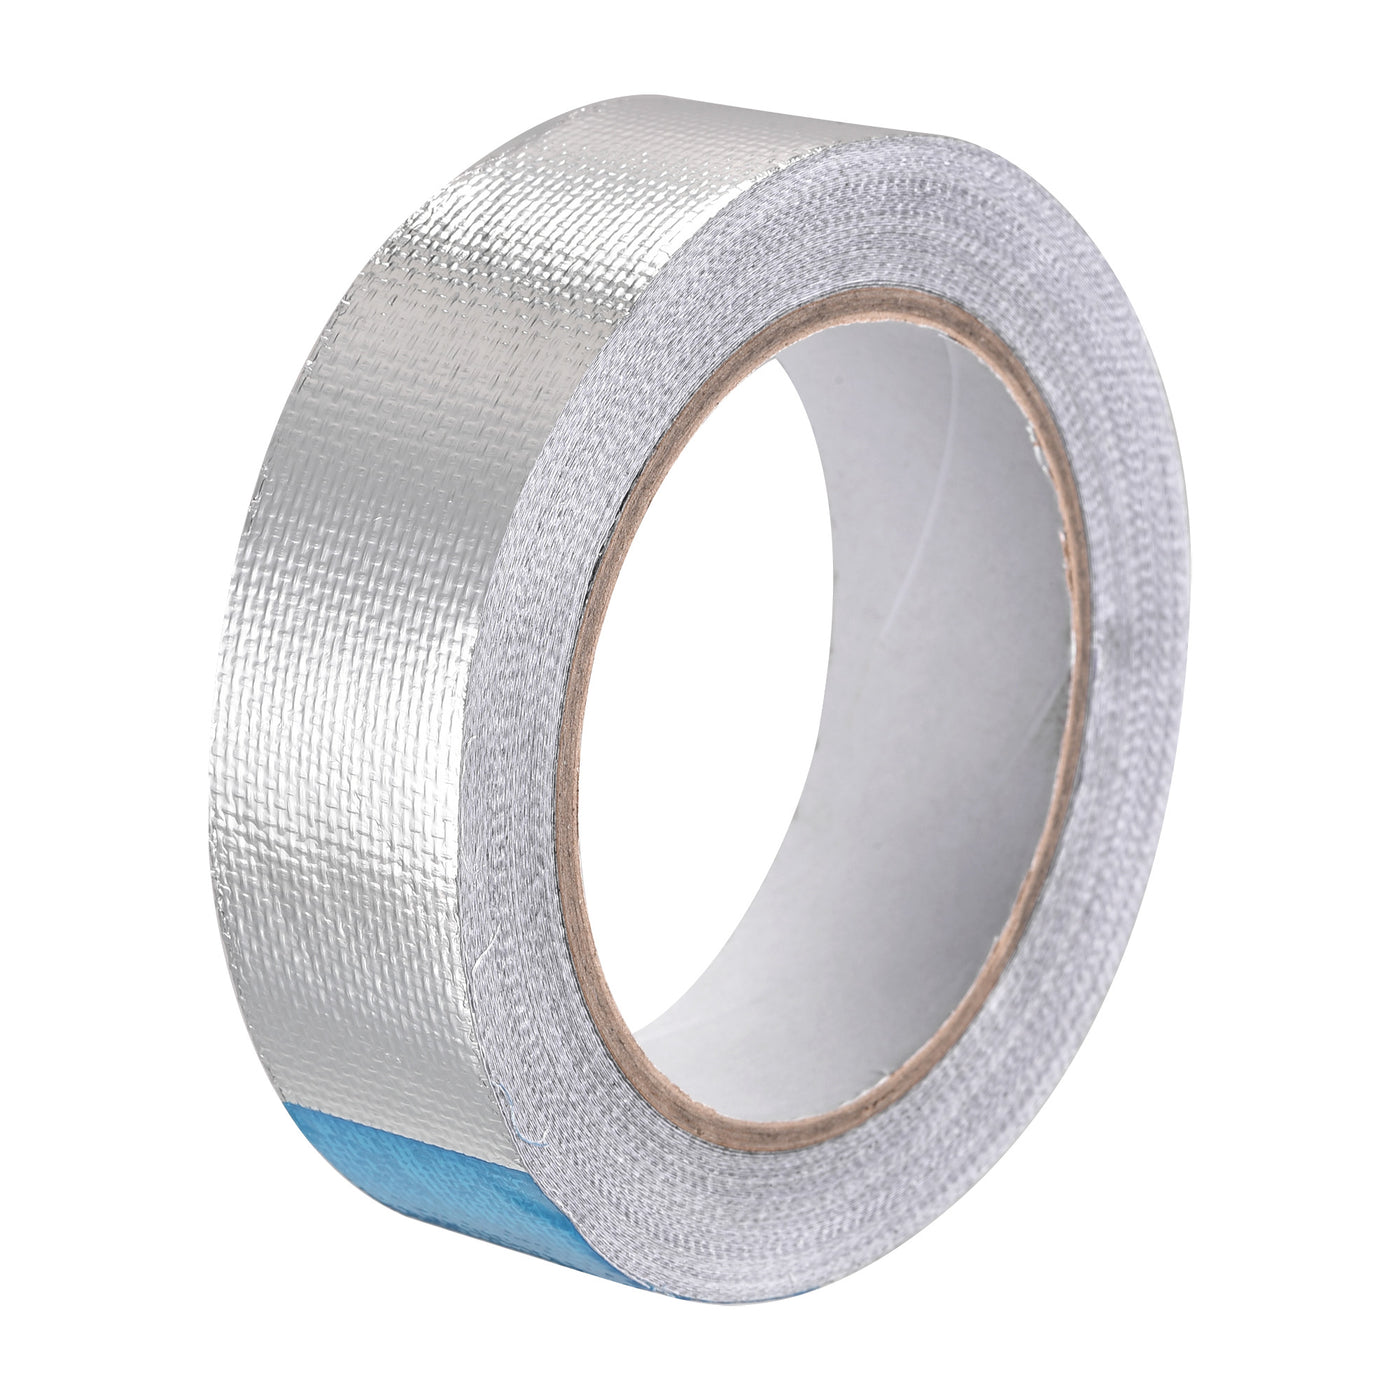 uxcell Uxcell Aluminum Foil Tape High-Temperature Tape for HVAC,Sealing 30mmx20m/65ft